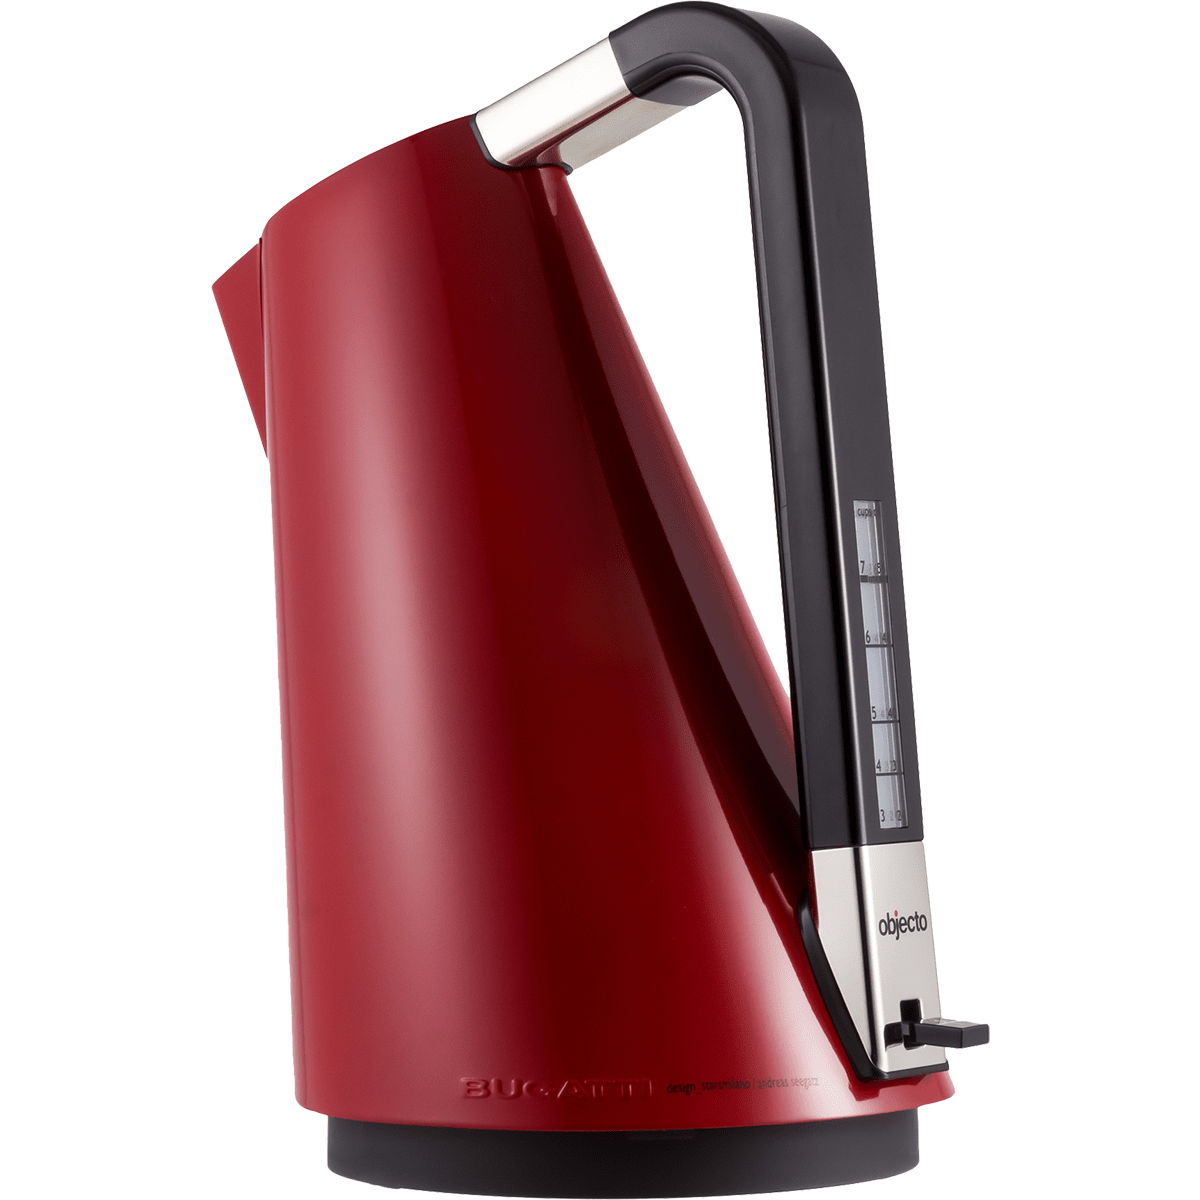 Objecto Electric Kettle - Red